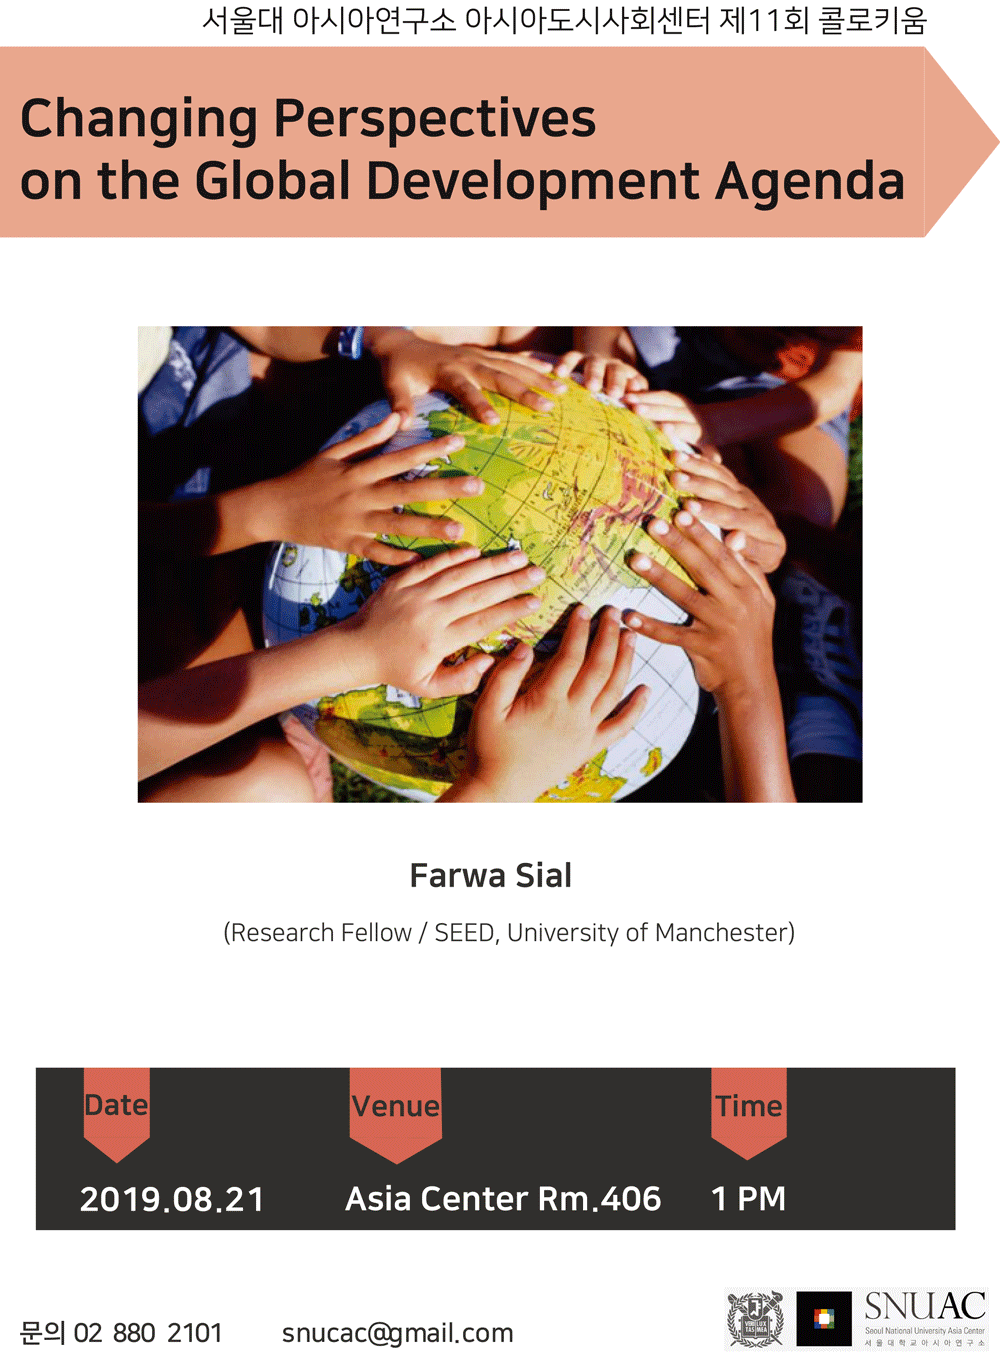 Changing Perspectives on the Global Development Agenda